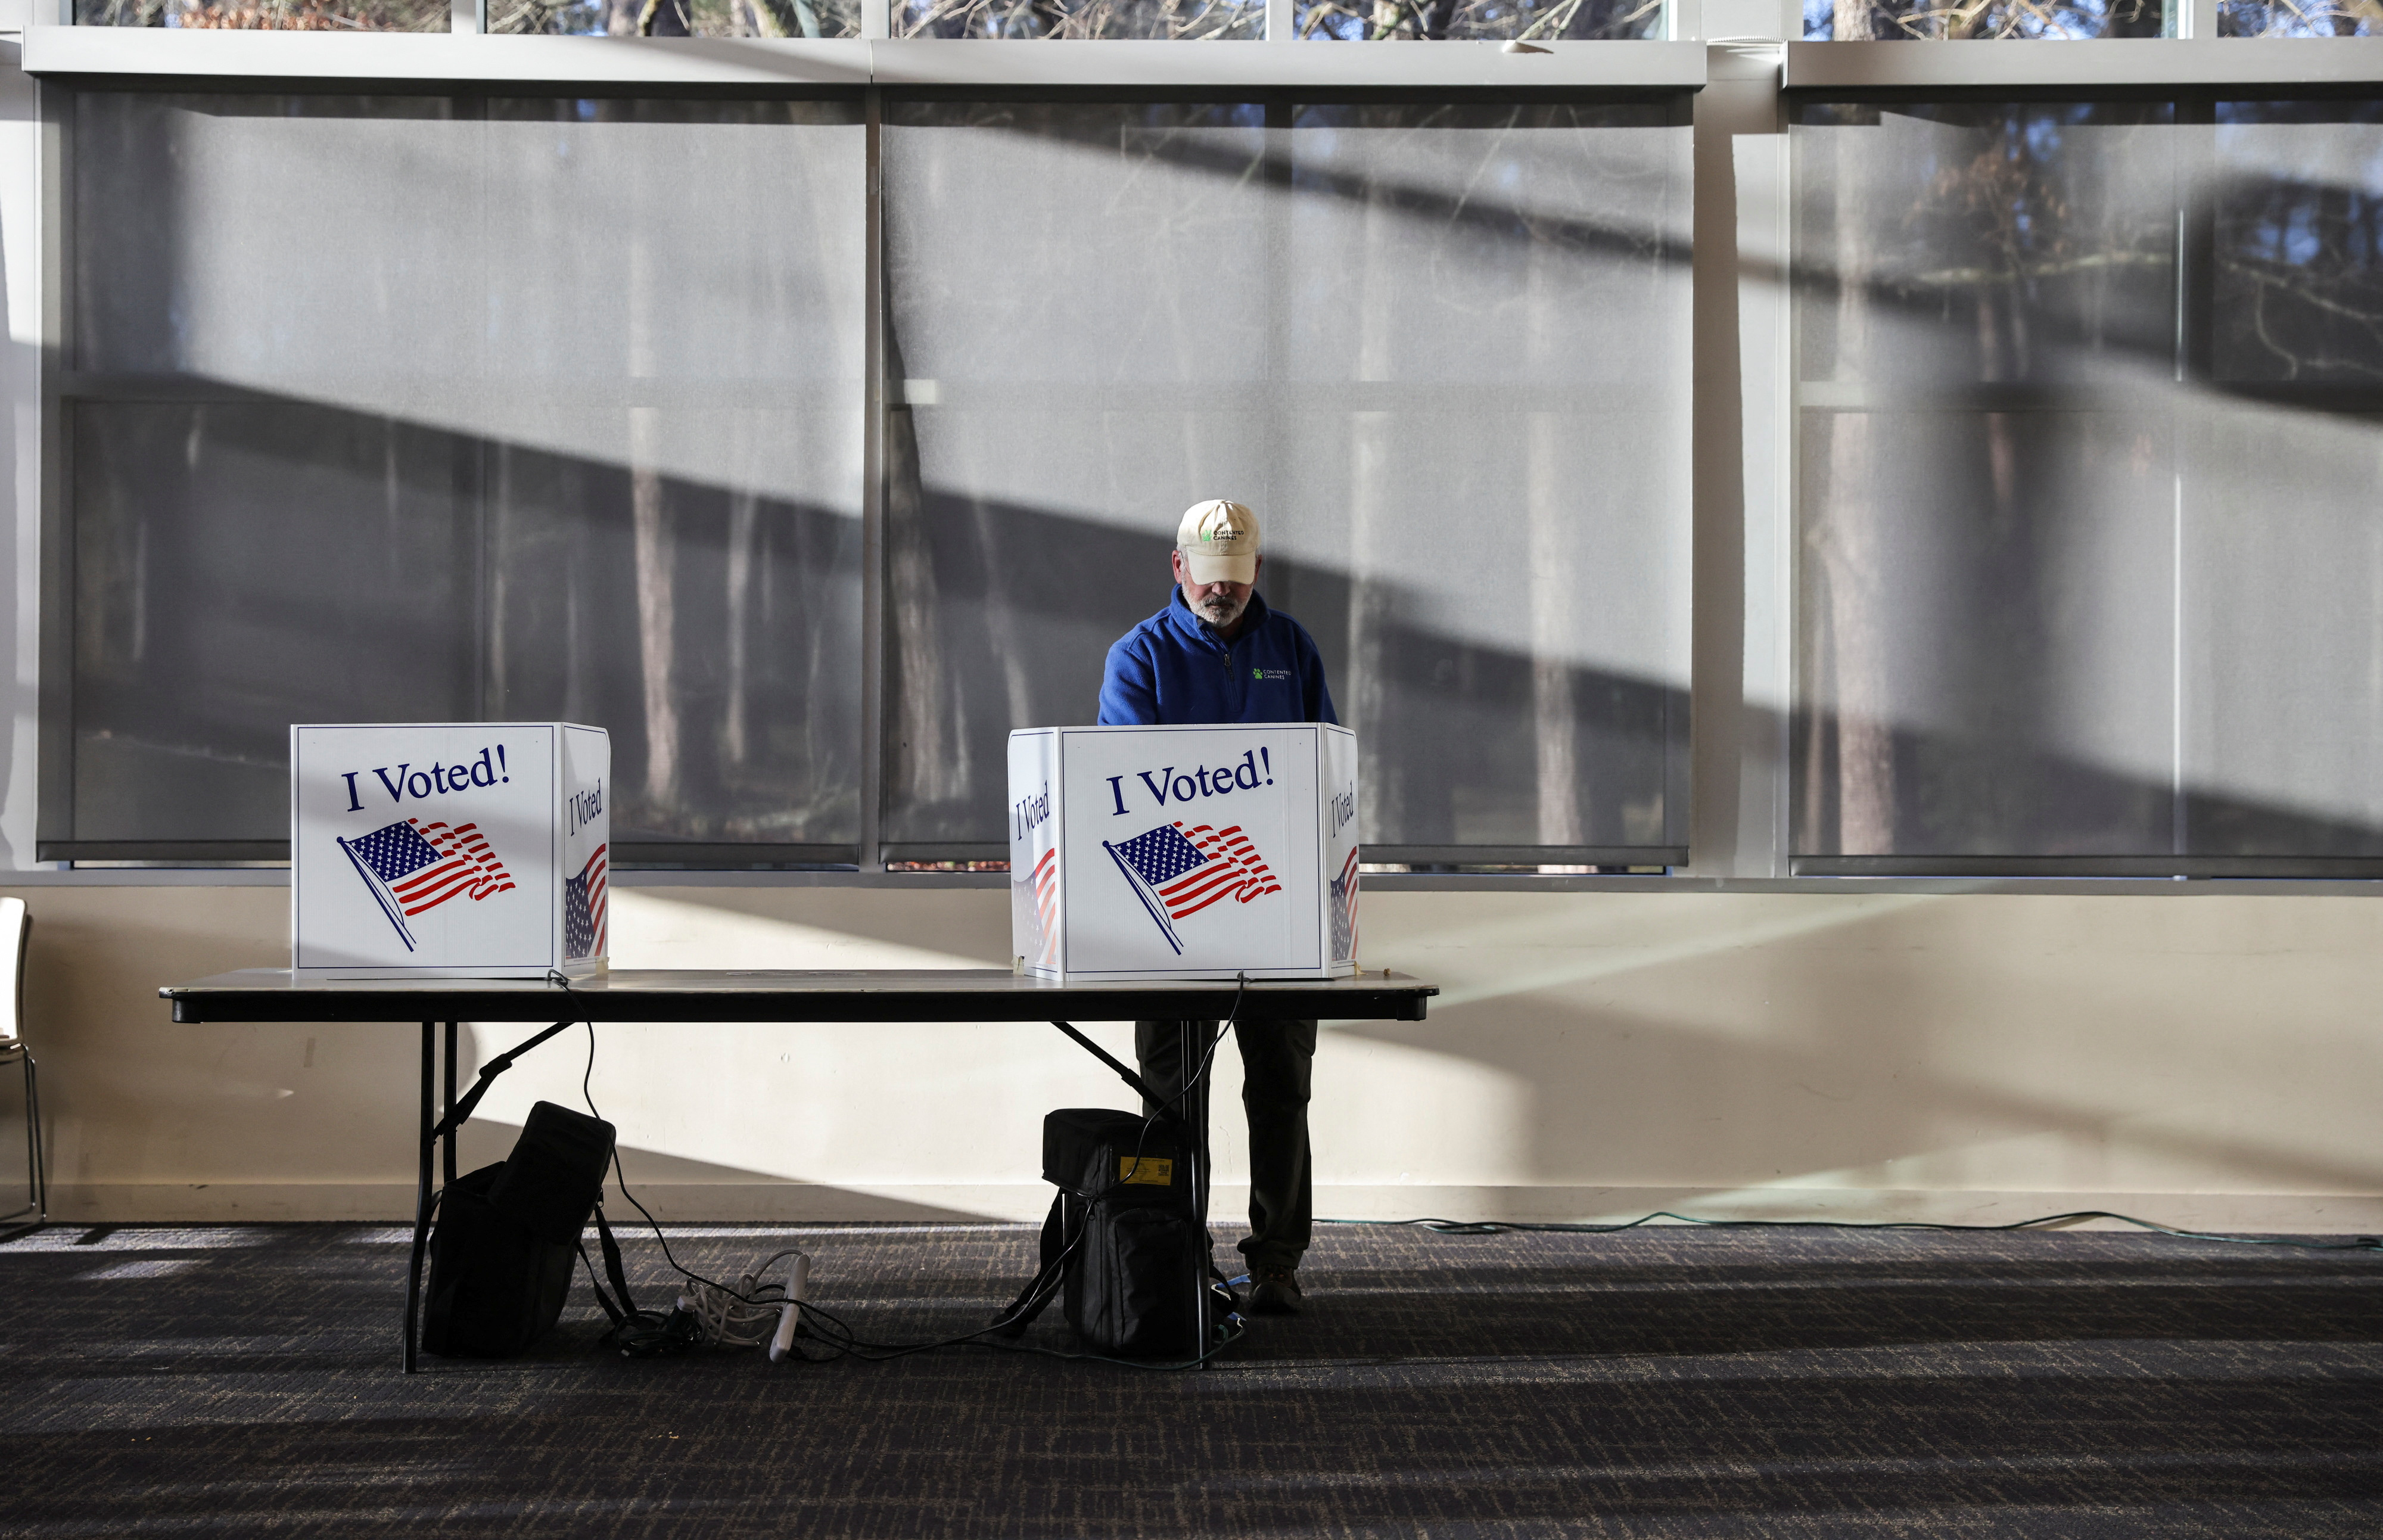 Voters cast their ballots in South Carolina republican presidential primary